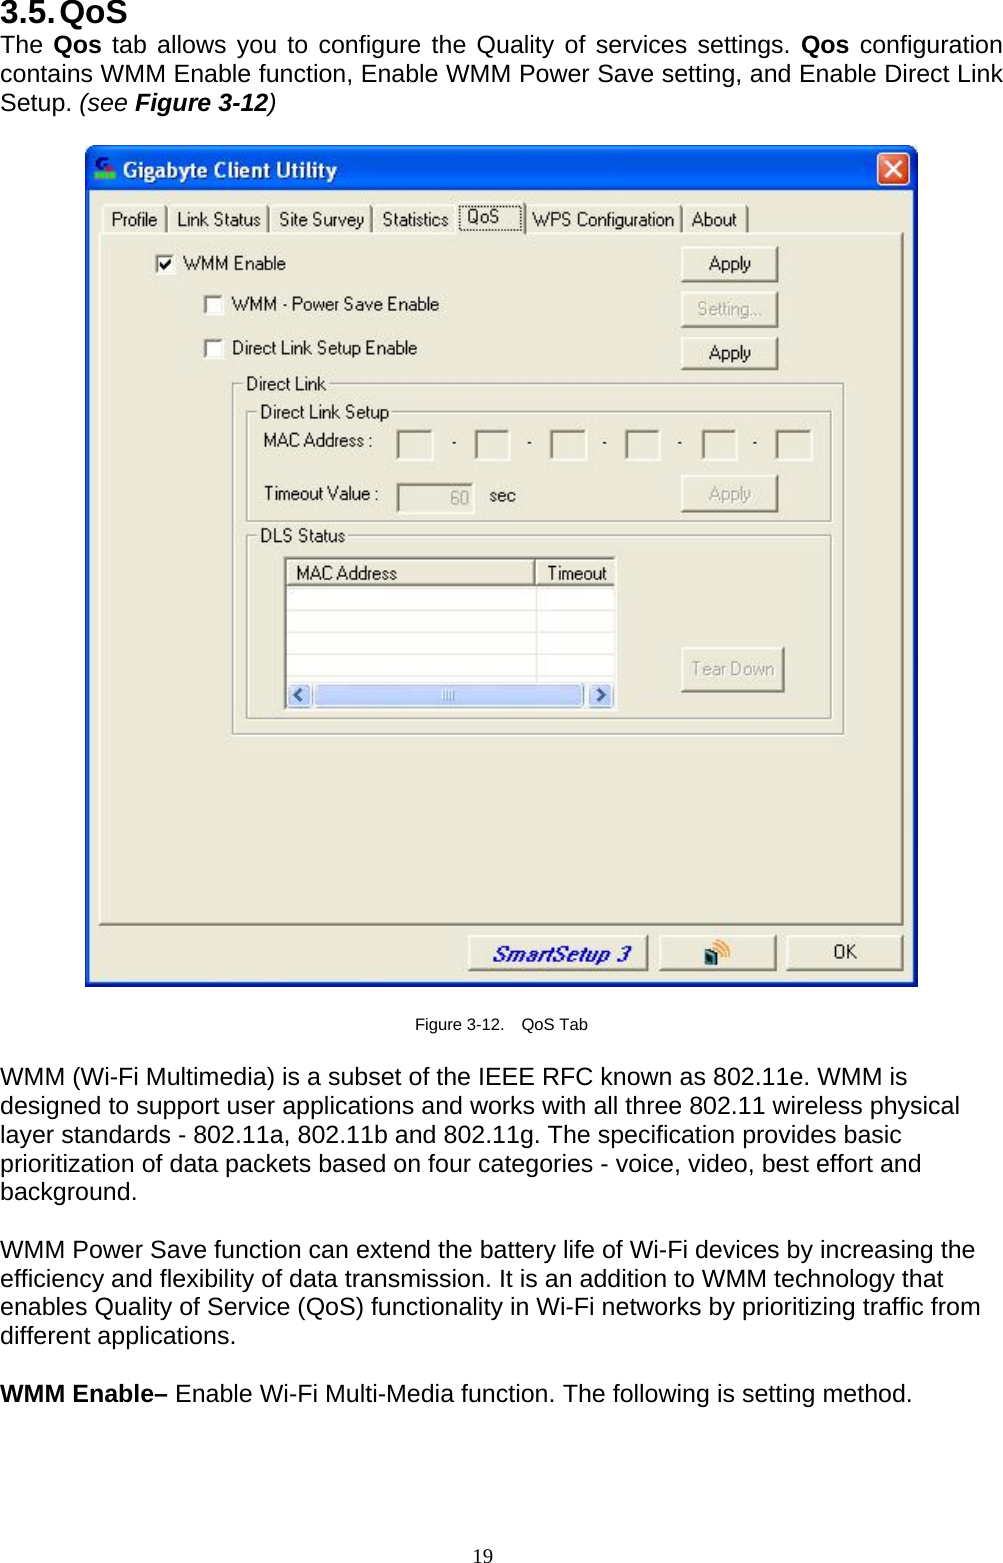 3.5. QoS The Qos tab allows you to configure the Quality of services settings. Qos configuration contains WMM Enable function, Enable WMM Power Save setting, and Enable Direct Link Setup. (see Figure 3-12)    Figure 3-12.  QoS Tab  WMM (Wi-Fi Multimedia) is a subset of the IEEE RFC known as 802.11e. WMM is designed to support user applications and works with all three 802.11 wireless physical layer standards - 802.11a, 802.11b and 802.11g. The specification provides basic prioritization of data packets based on four categories - voice, video, best effort and background.   WMM Power Save function can extend the battery life of Wi-Fi devices by increasing the efficiency and flexibility of data transmission. It is an addition to WMM technology that enables Quality of Service (QoS) functionality in Wi-Fi networks by prioritizing traffic from different applications.  WMM Enable– Enable Wi-Fi Multi-Media function. The following is setting method.  19   